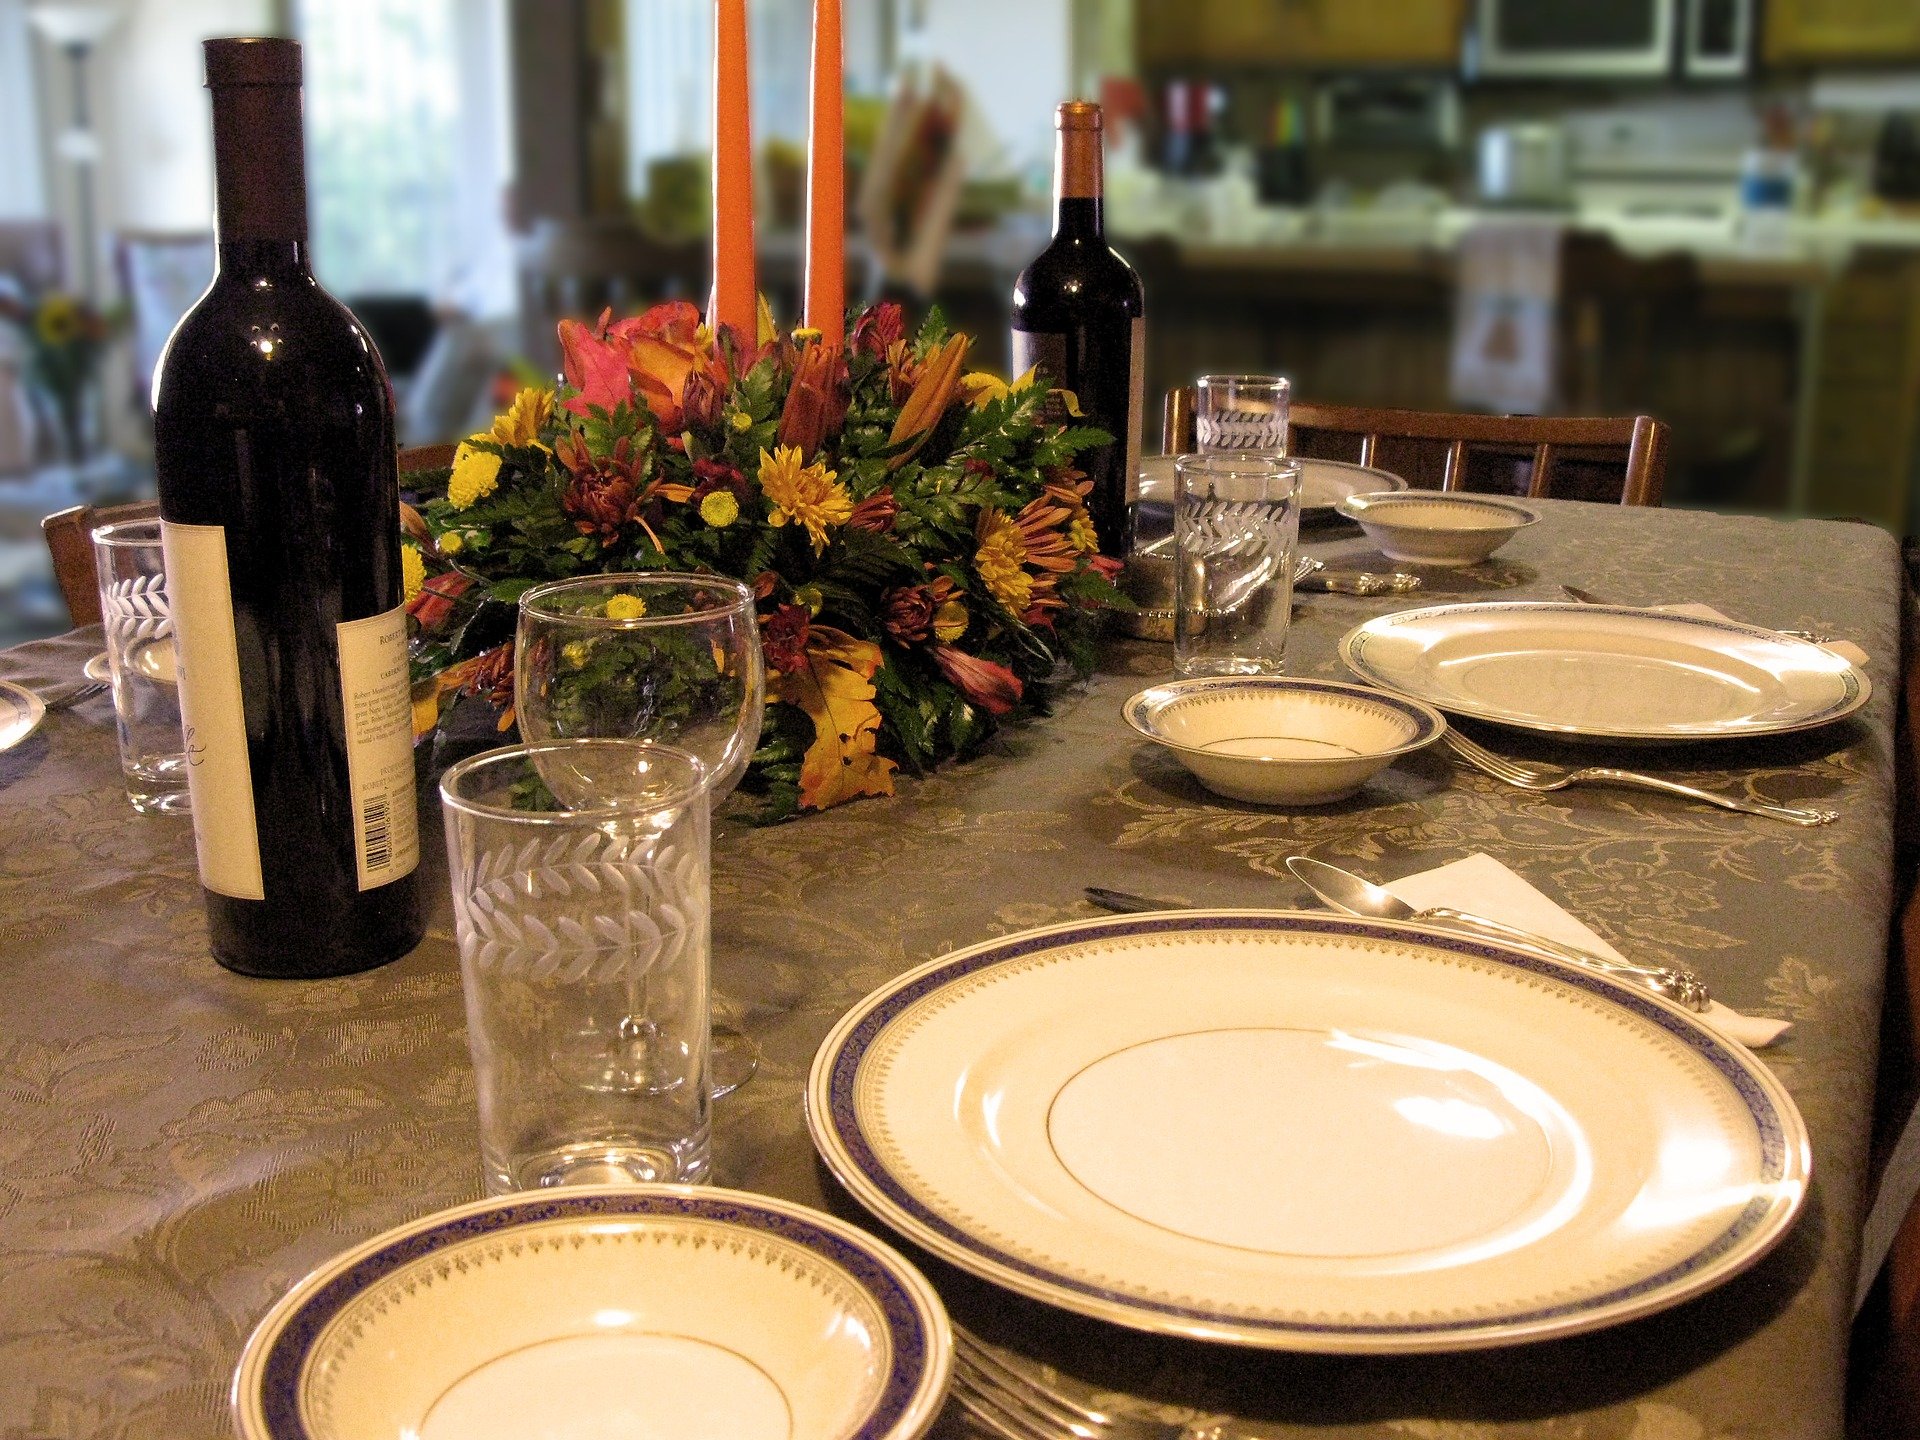 Dining table set-up for Thanksgiving dinner. | Source: Pixabay